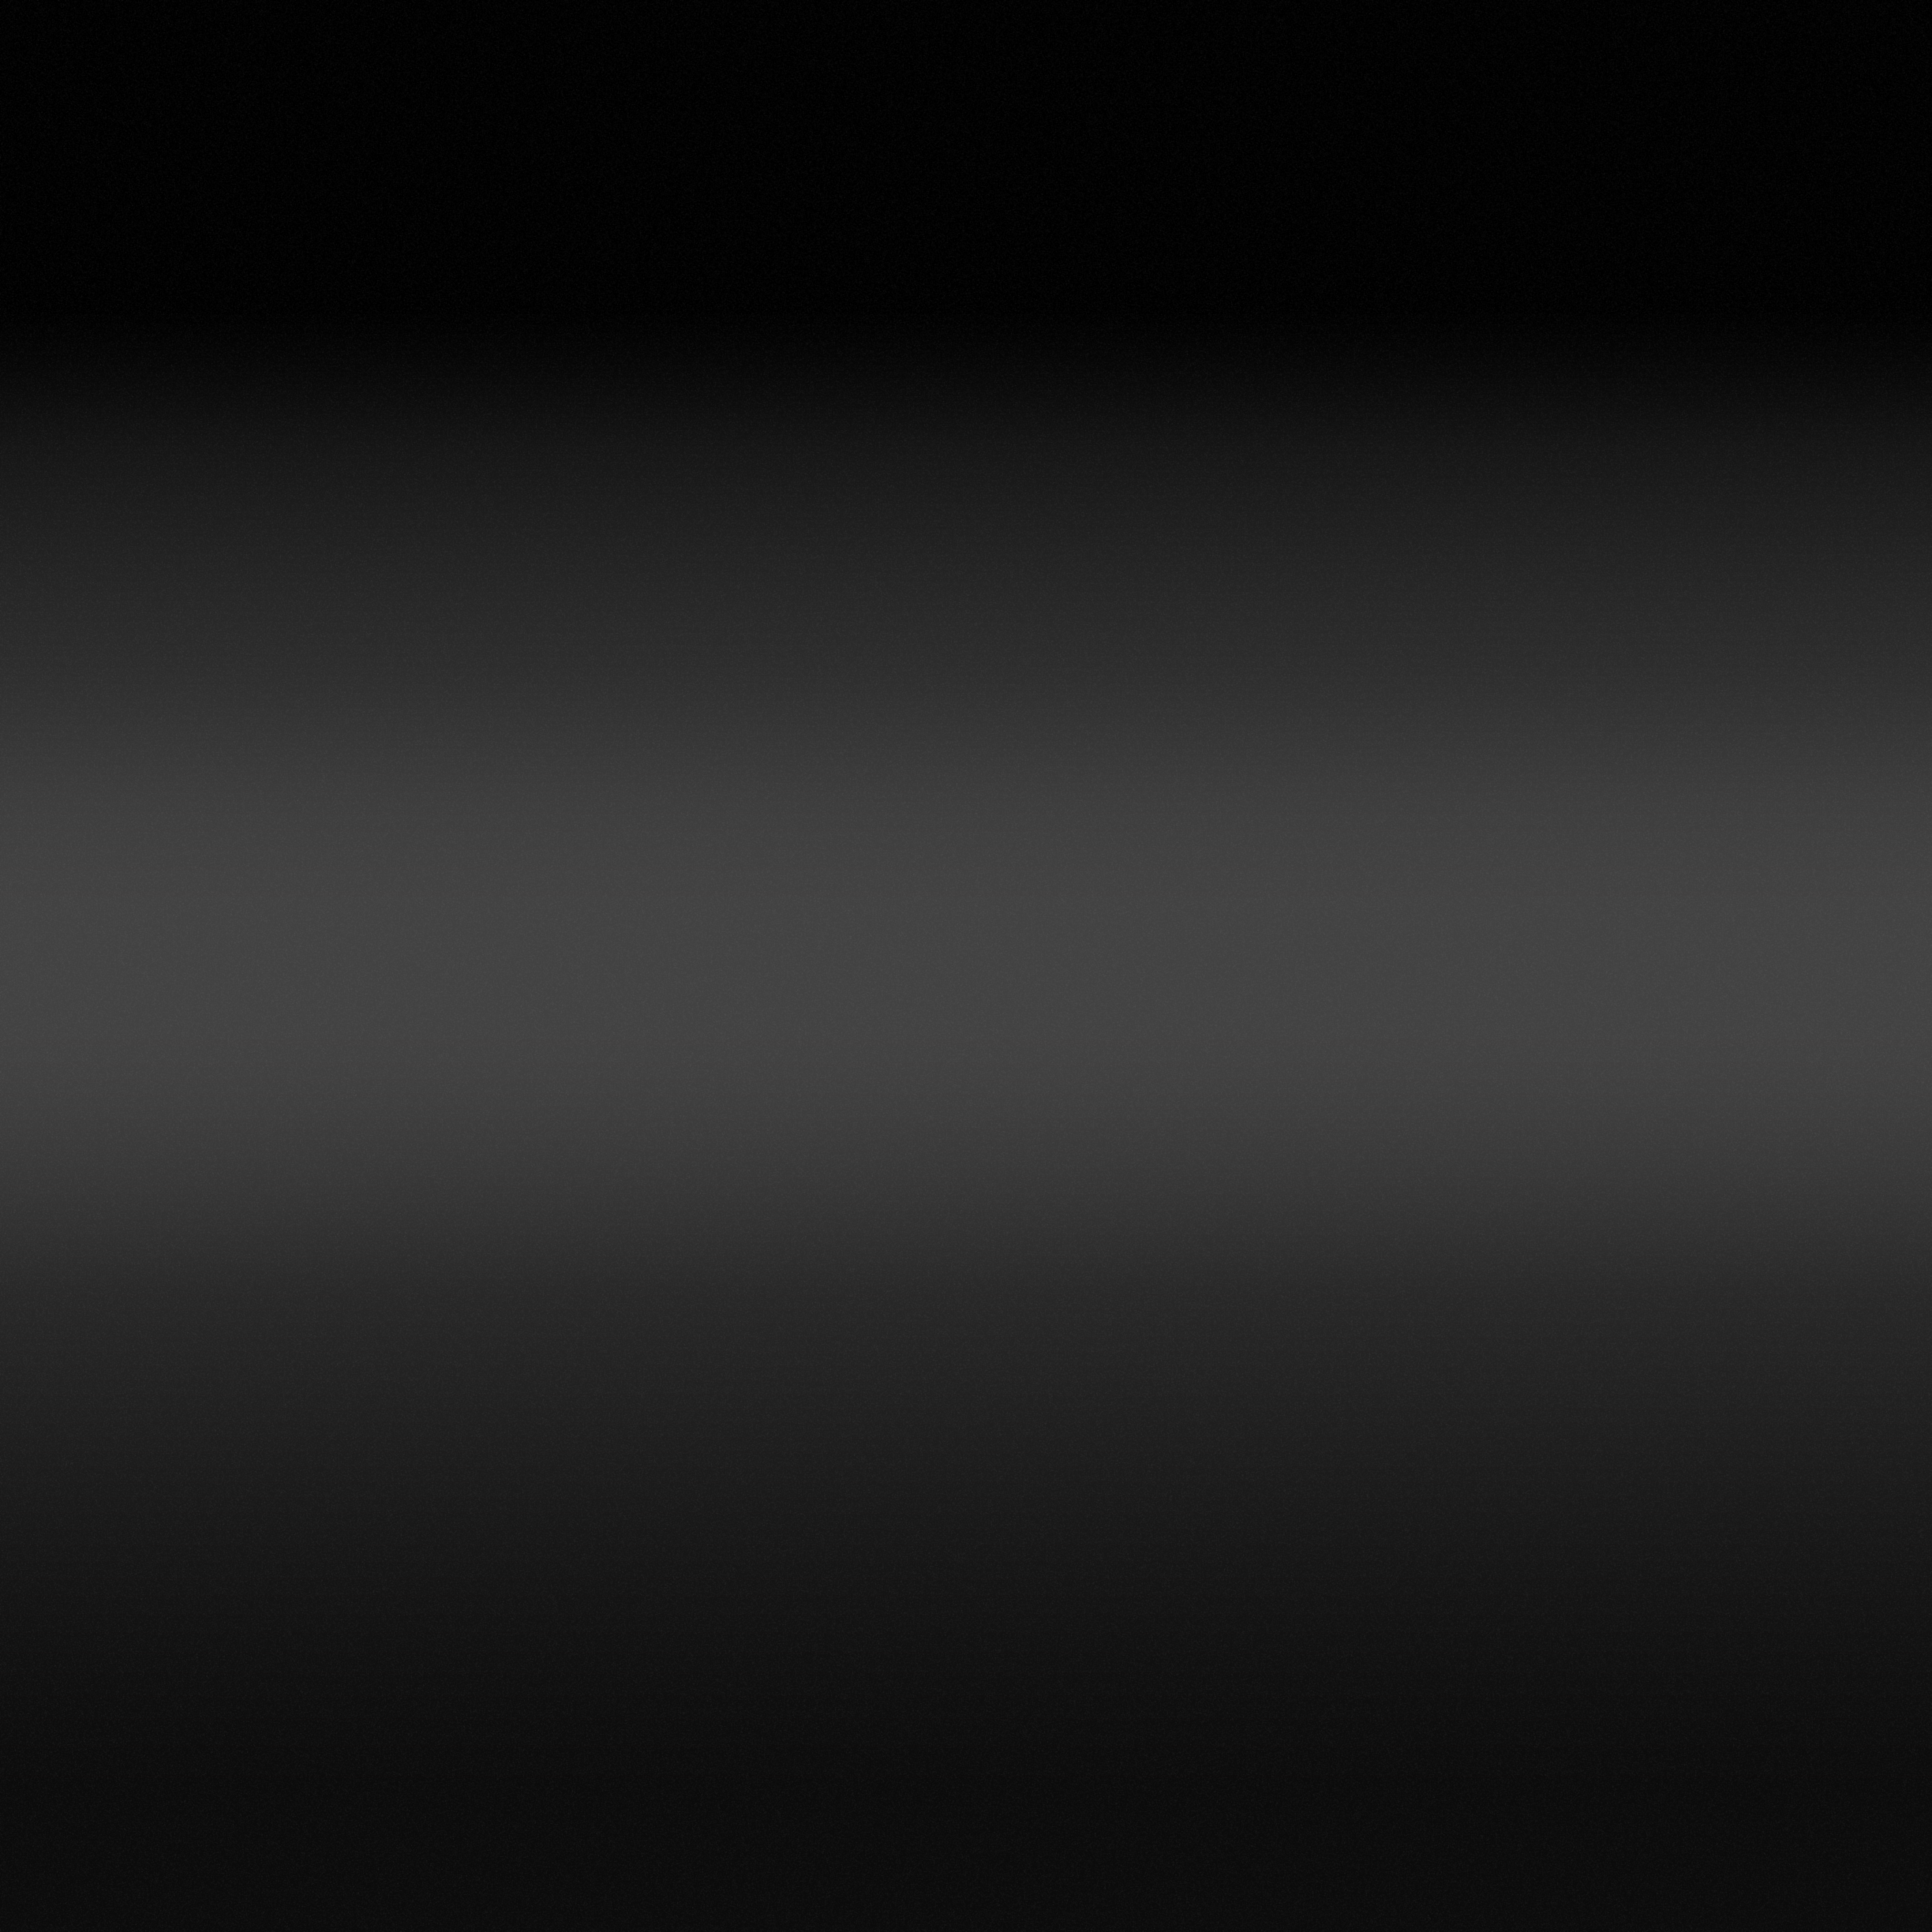 Space_gray_iPad_iOS7.png